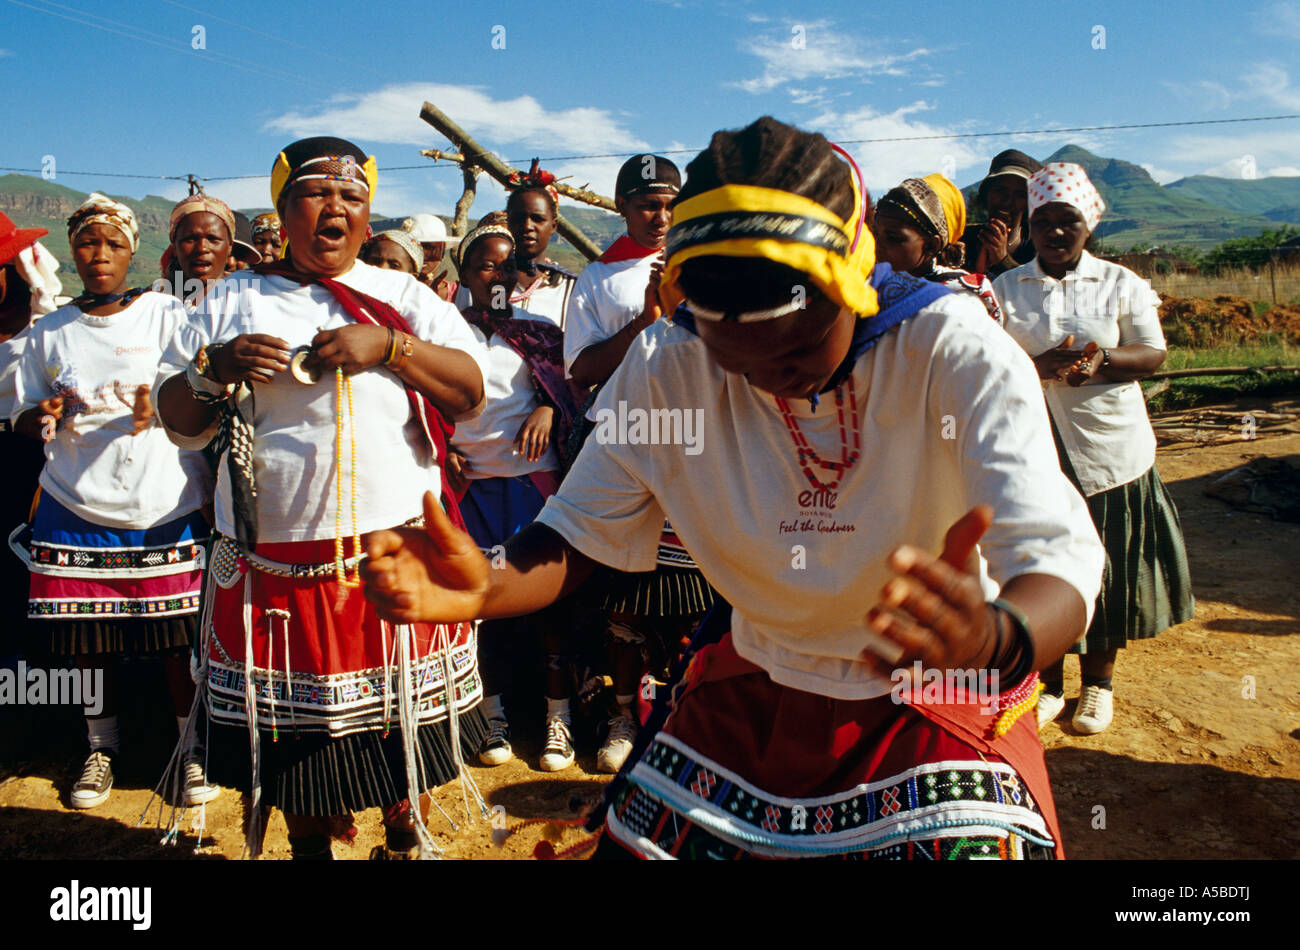 Local villagers performing the traditional Zulu dance, South Africa Stock Photo